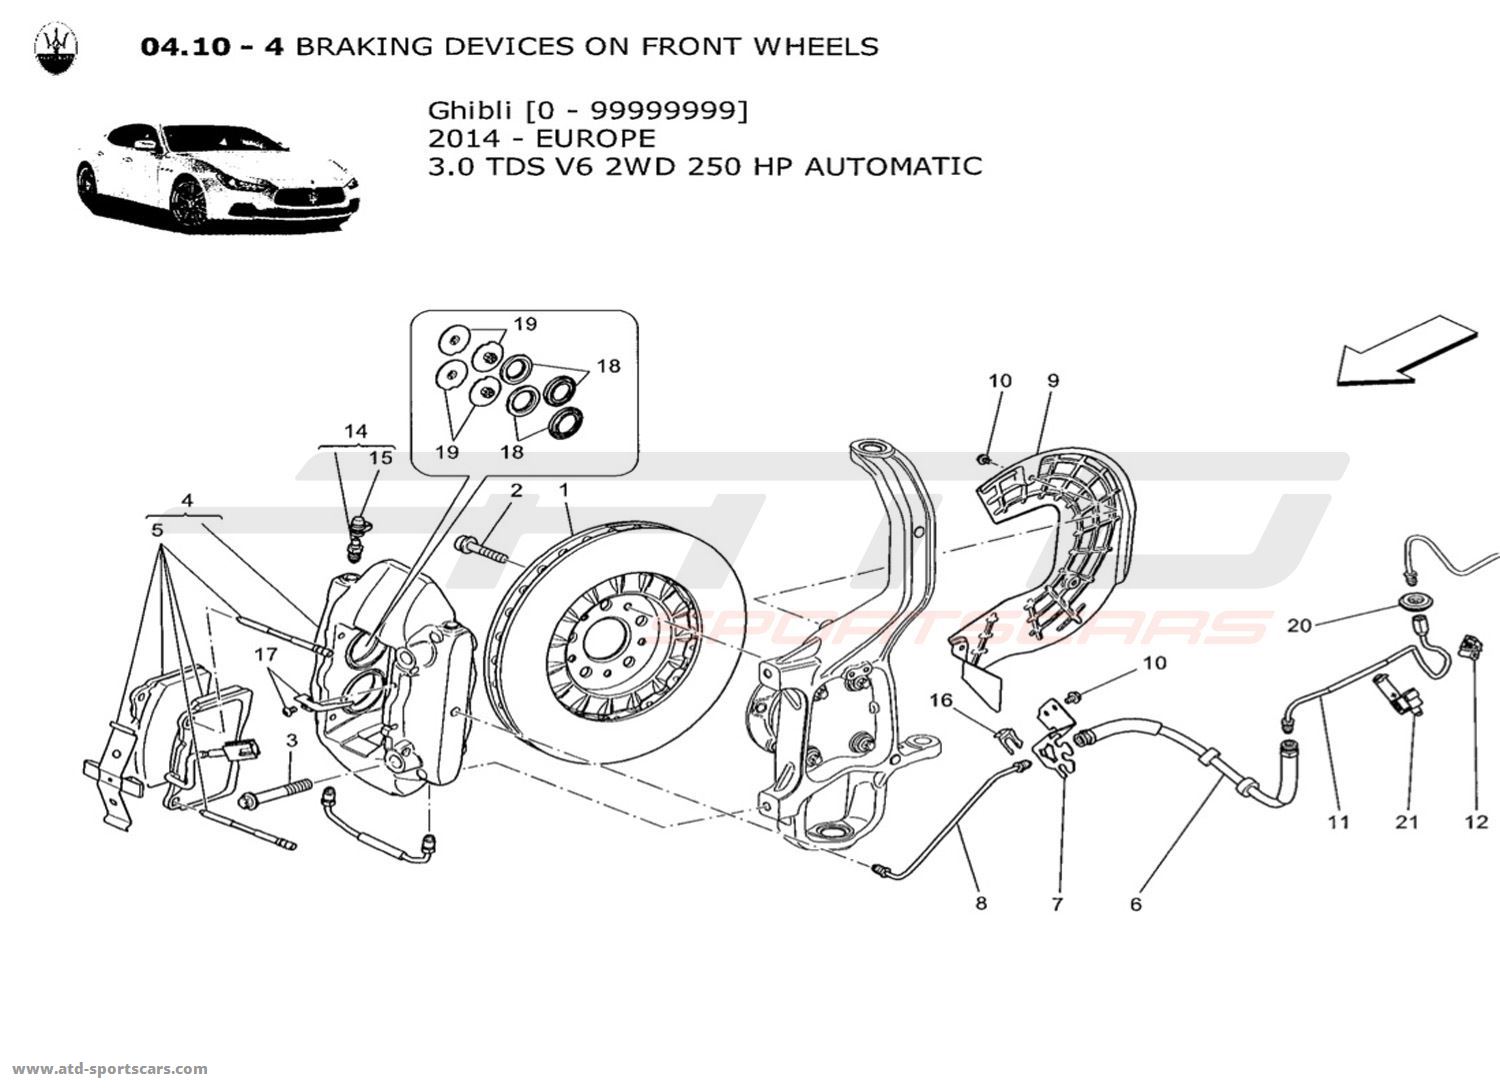 BRAKING DEVICES ON FRONT WHEELS